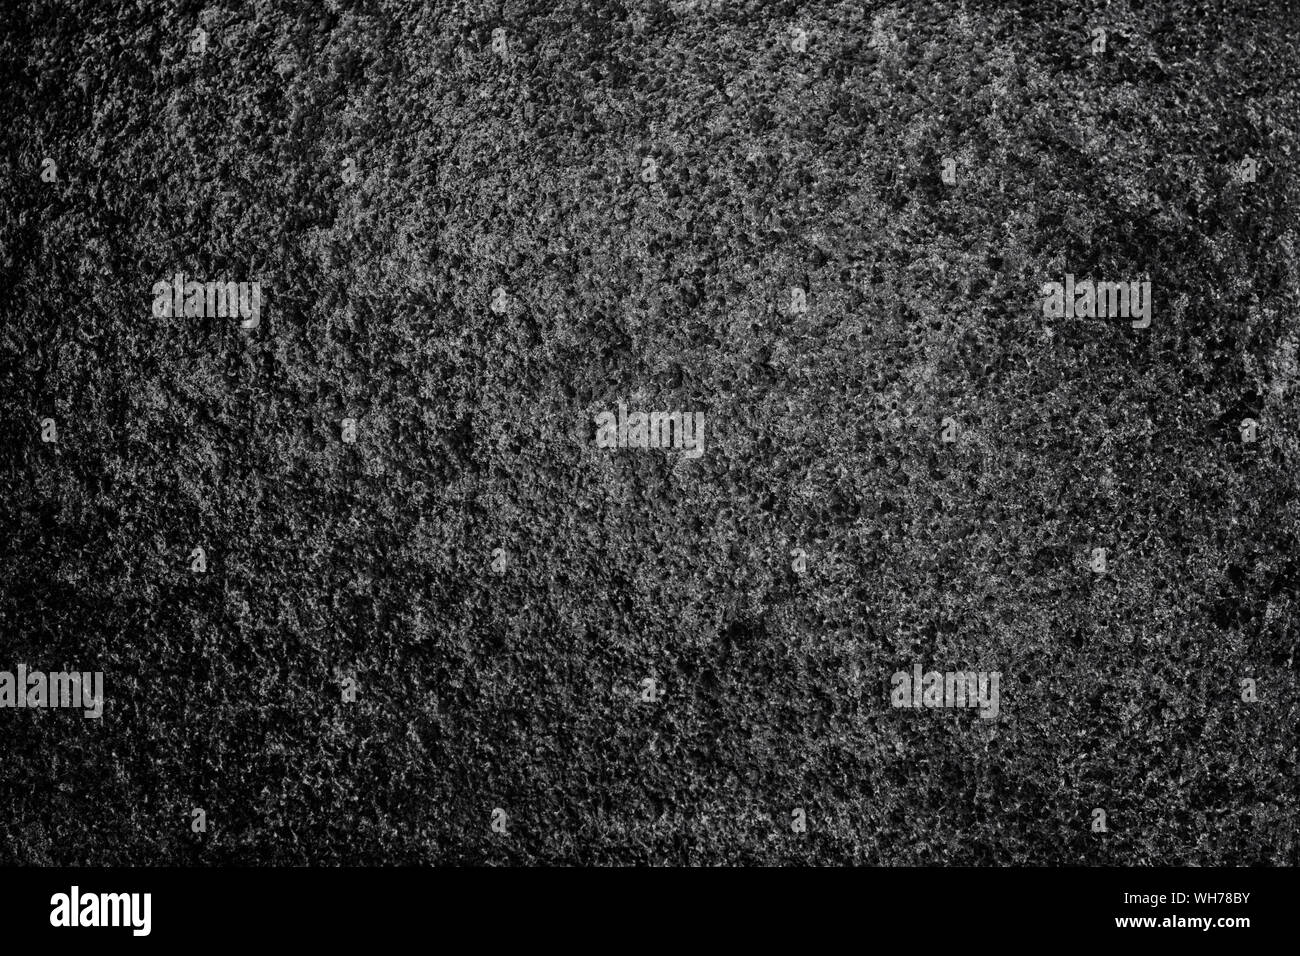 black stone texture rock background ,High resolution nature background for design blackdrop or overlay Stock Photo